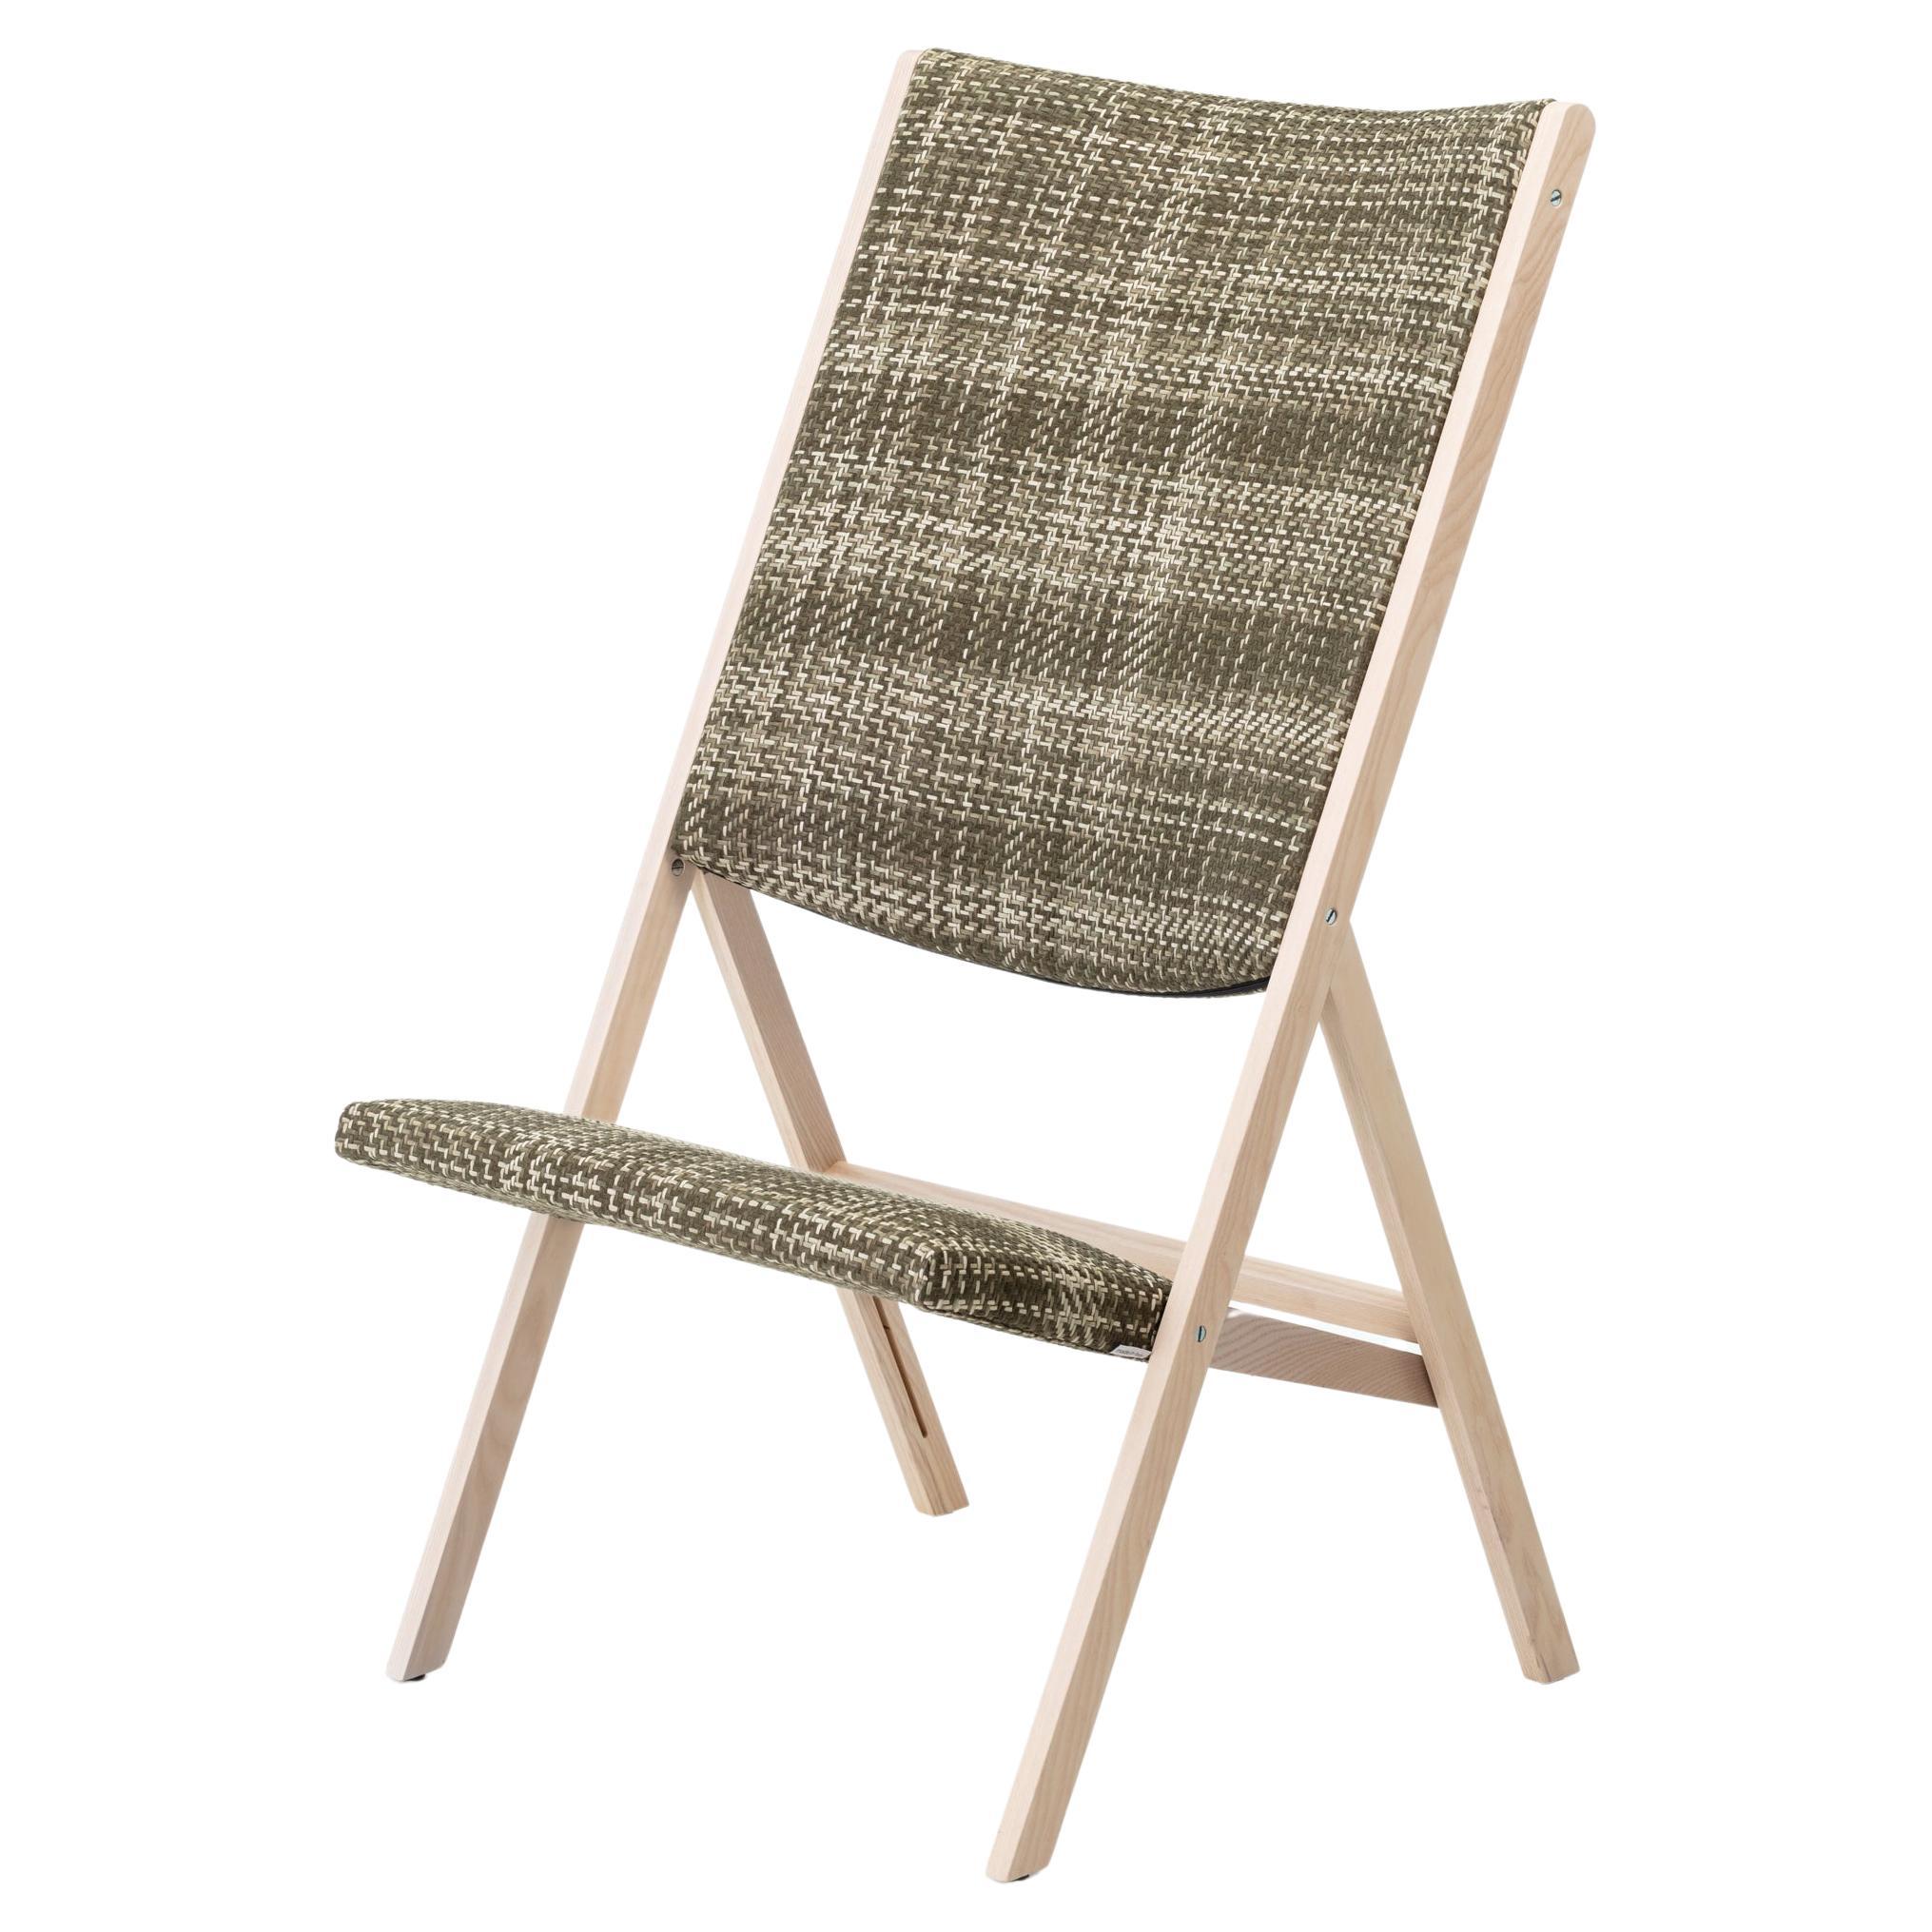 Gio Ponti by Molteni - Folding Chair - Discontinued Edition